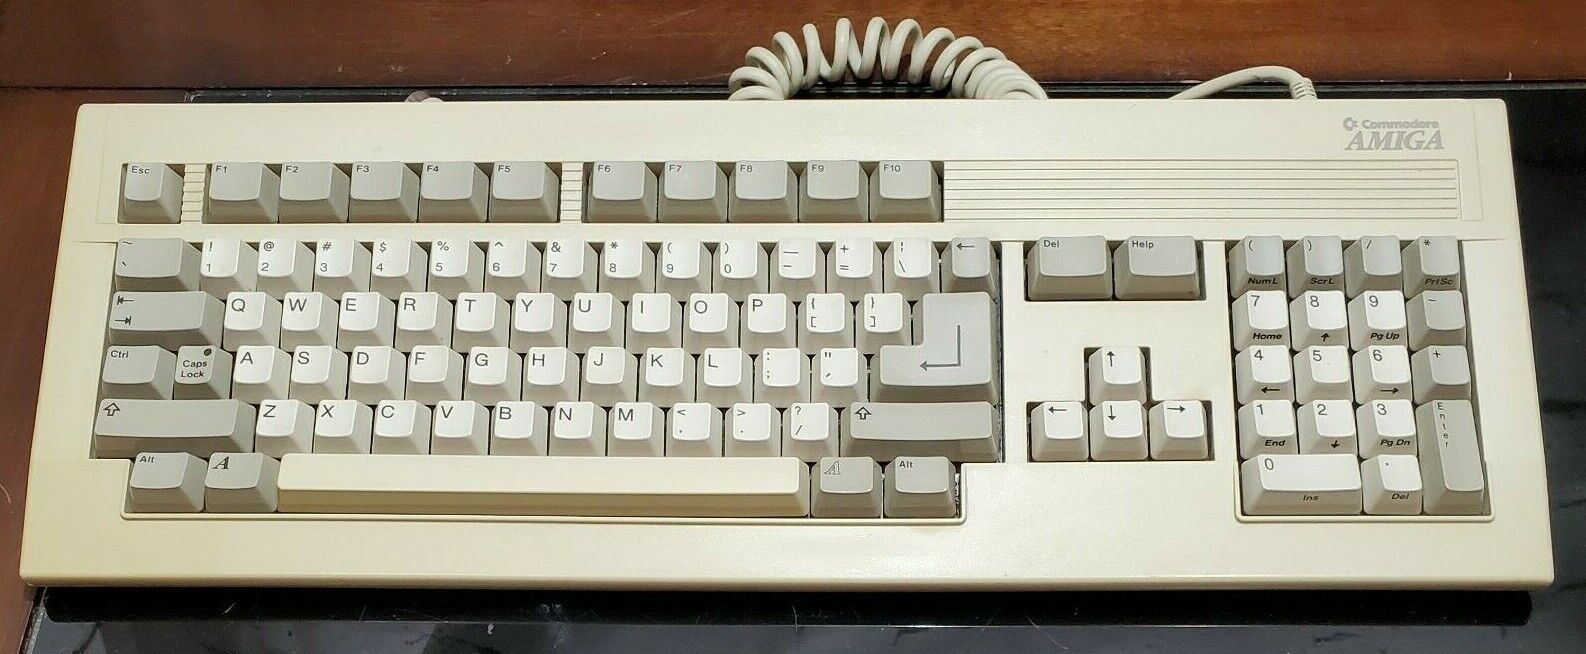 Commodore Amiga 3000 Keyboard, KKQ-E94YC, CTRL-A-A Doesn\'t Work, As-Is